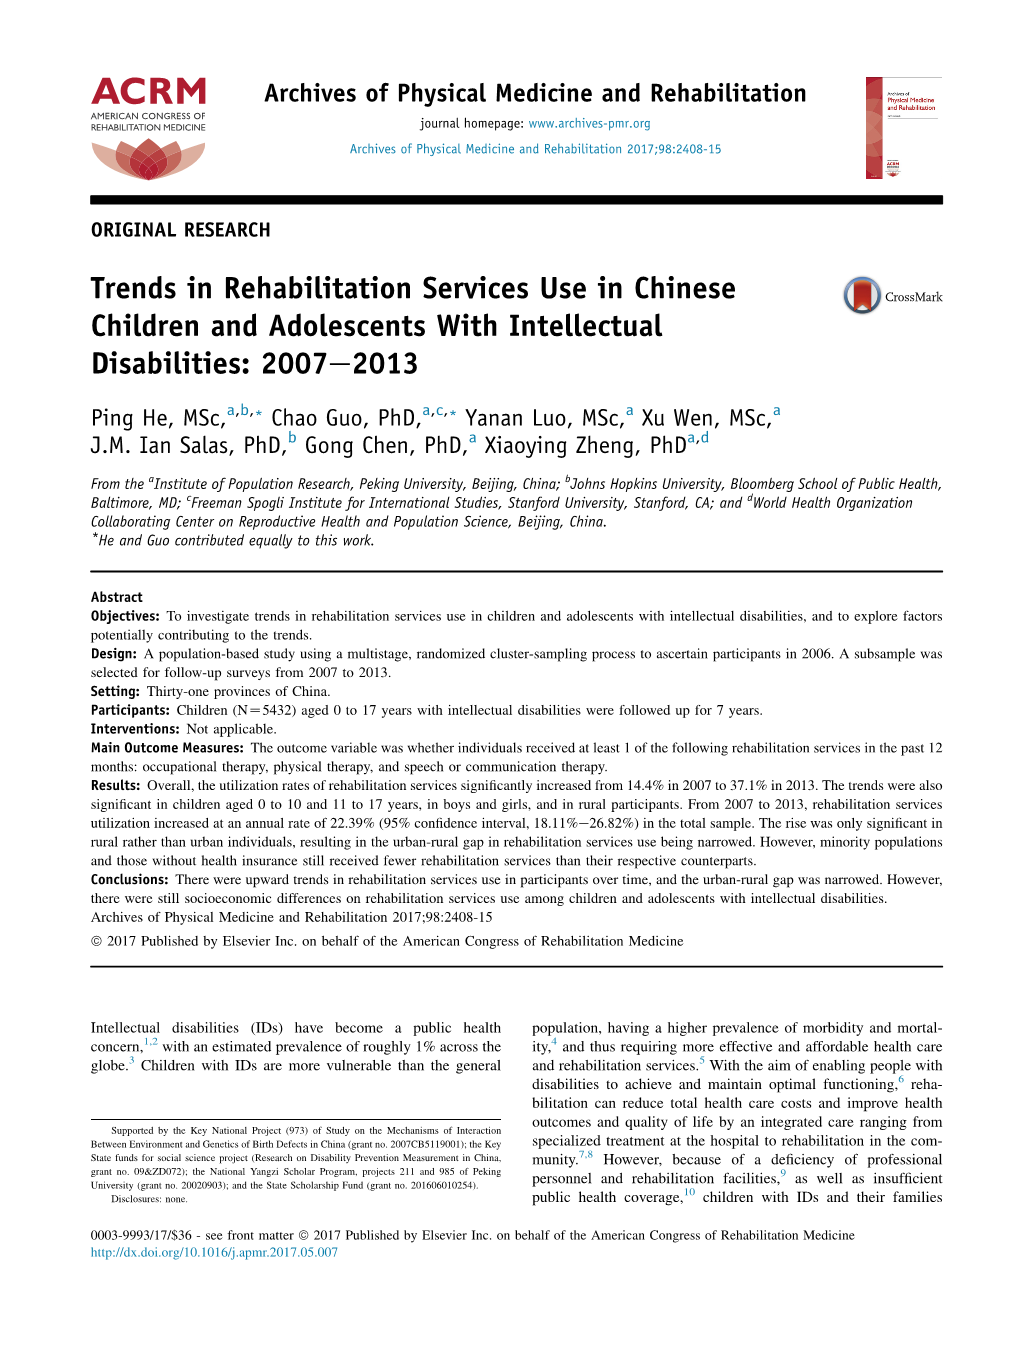 Trends in Rehabilitation Services Use in Chinese Children and Adolescents with Intellectual Disabilities: 2007E2013